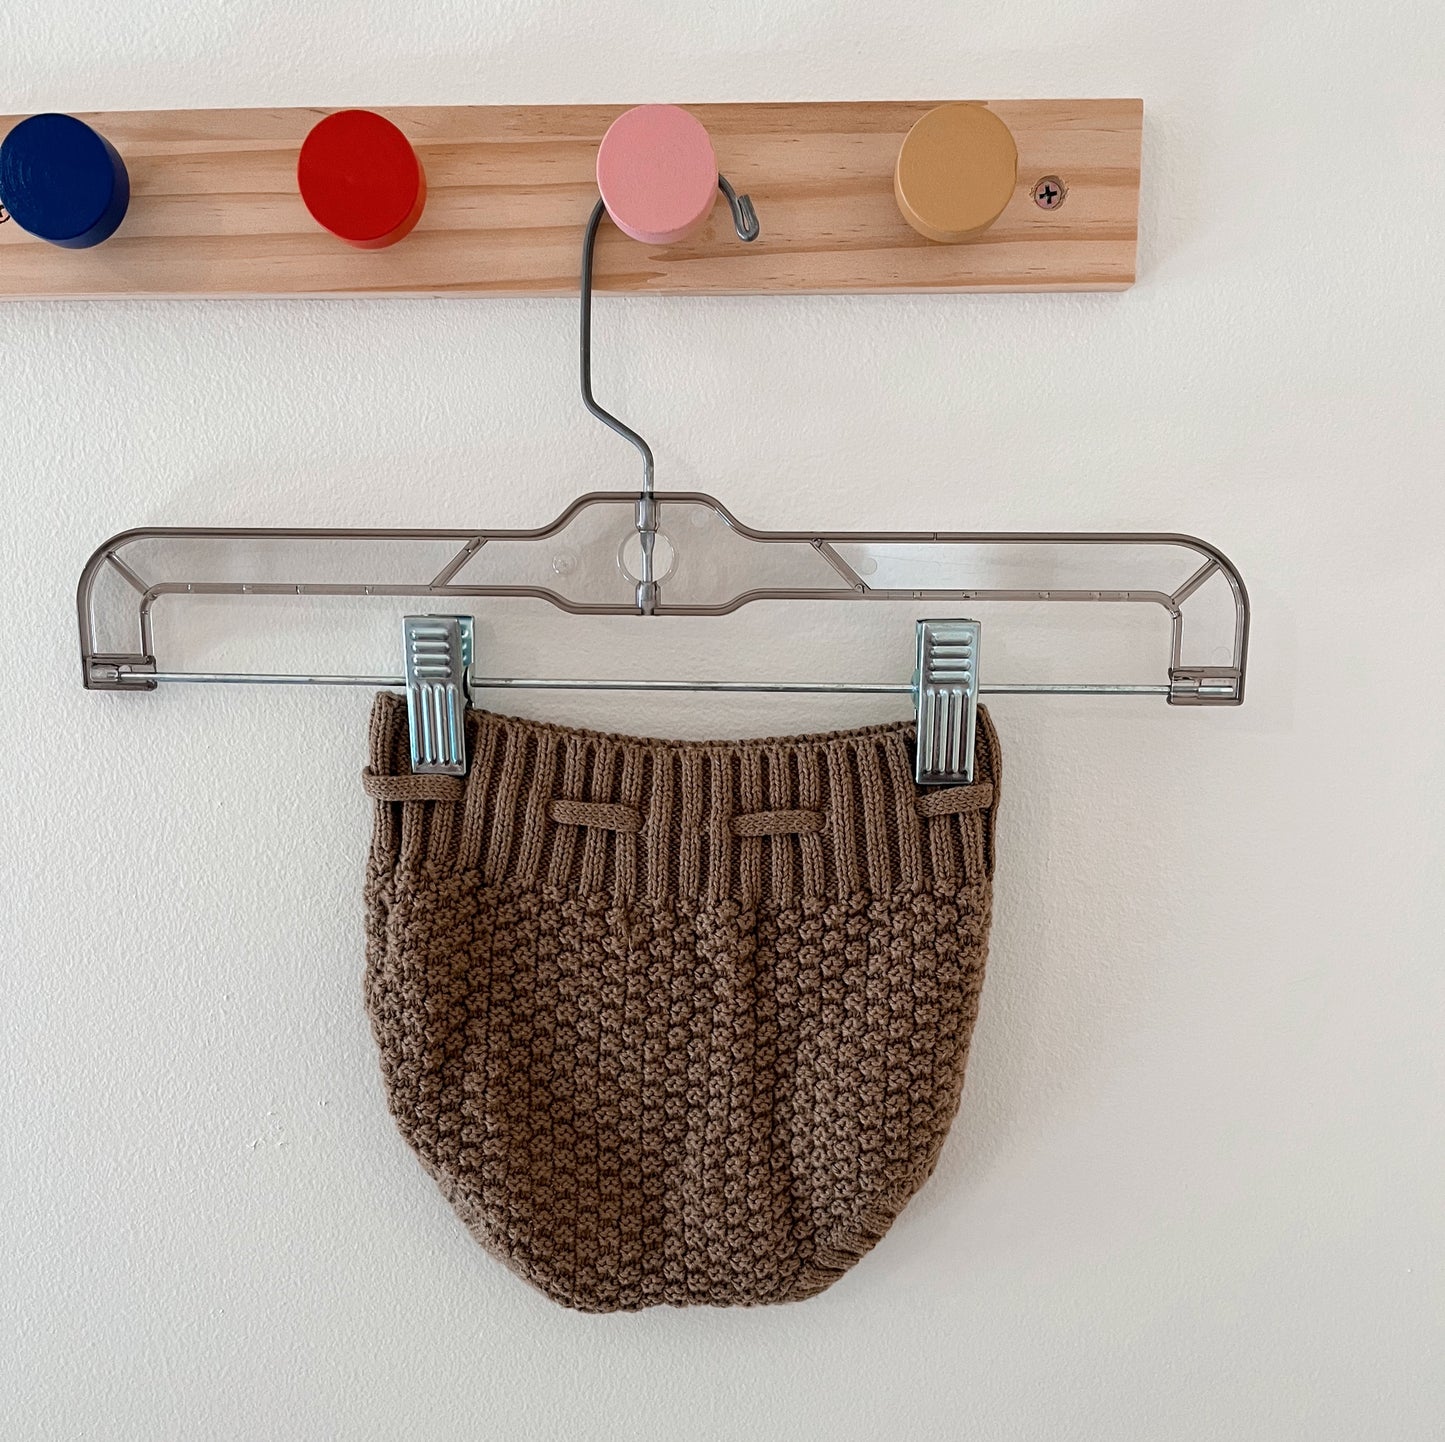 Pre-Loved Quincy Mae Knit Tie Bloomer - Walnut - Size 3-6 Months